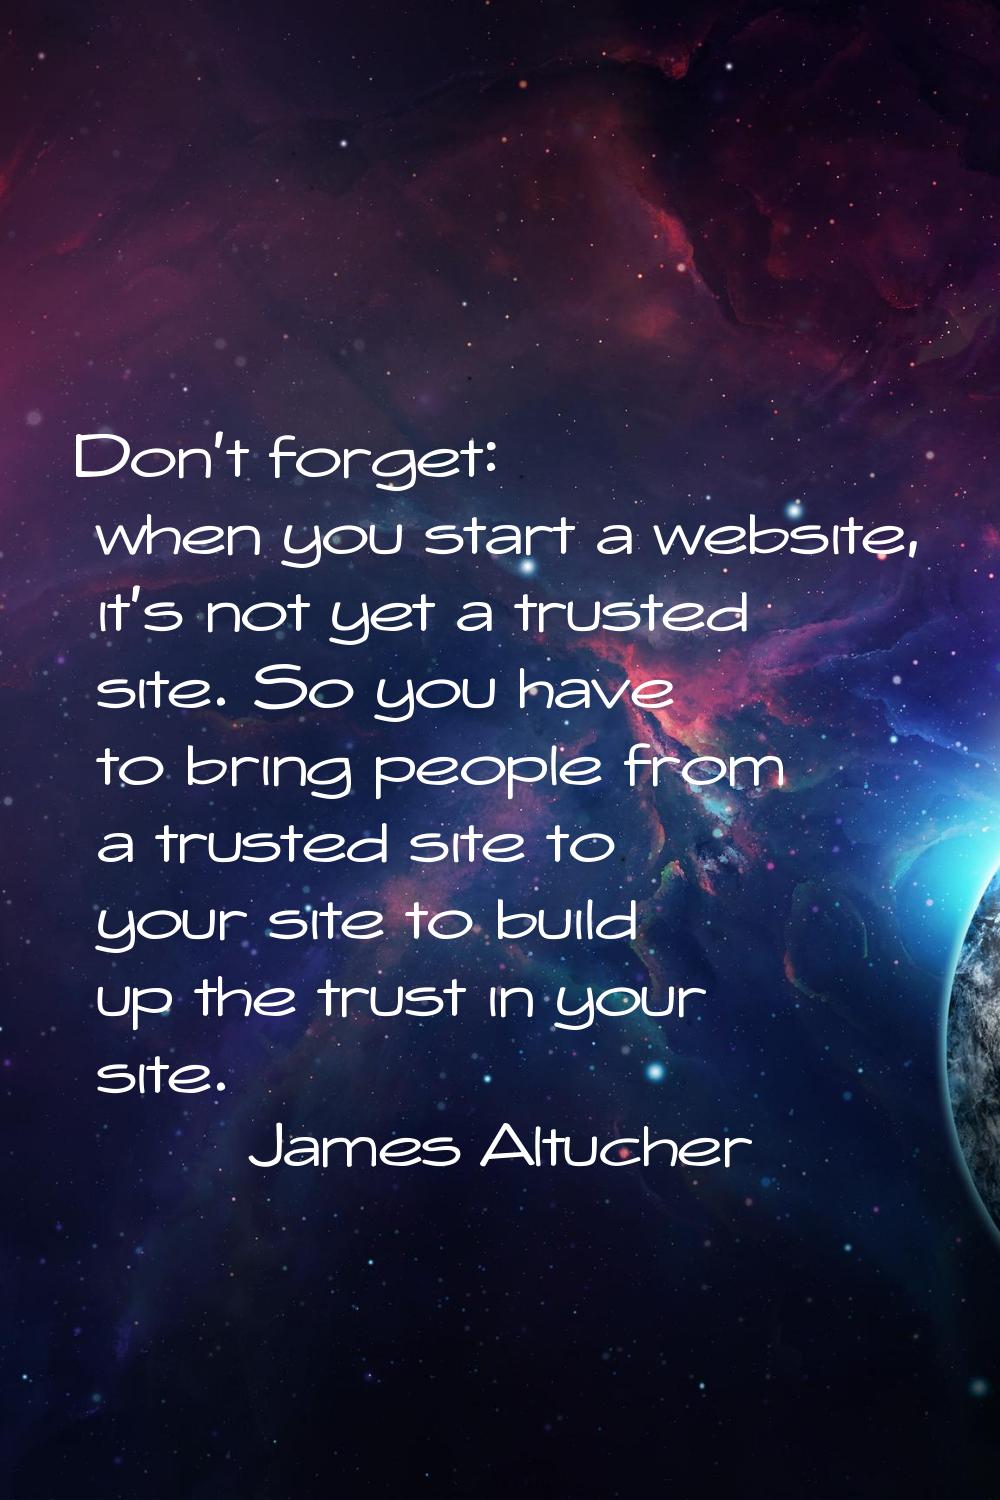 Don't forget: when you start a website, it's not yet a trusted site. So you have to bring people fr